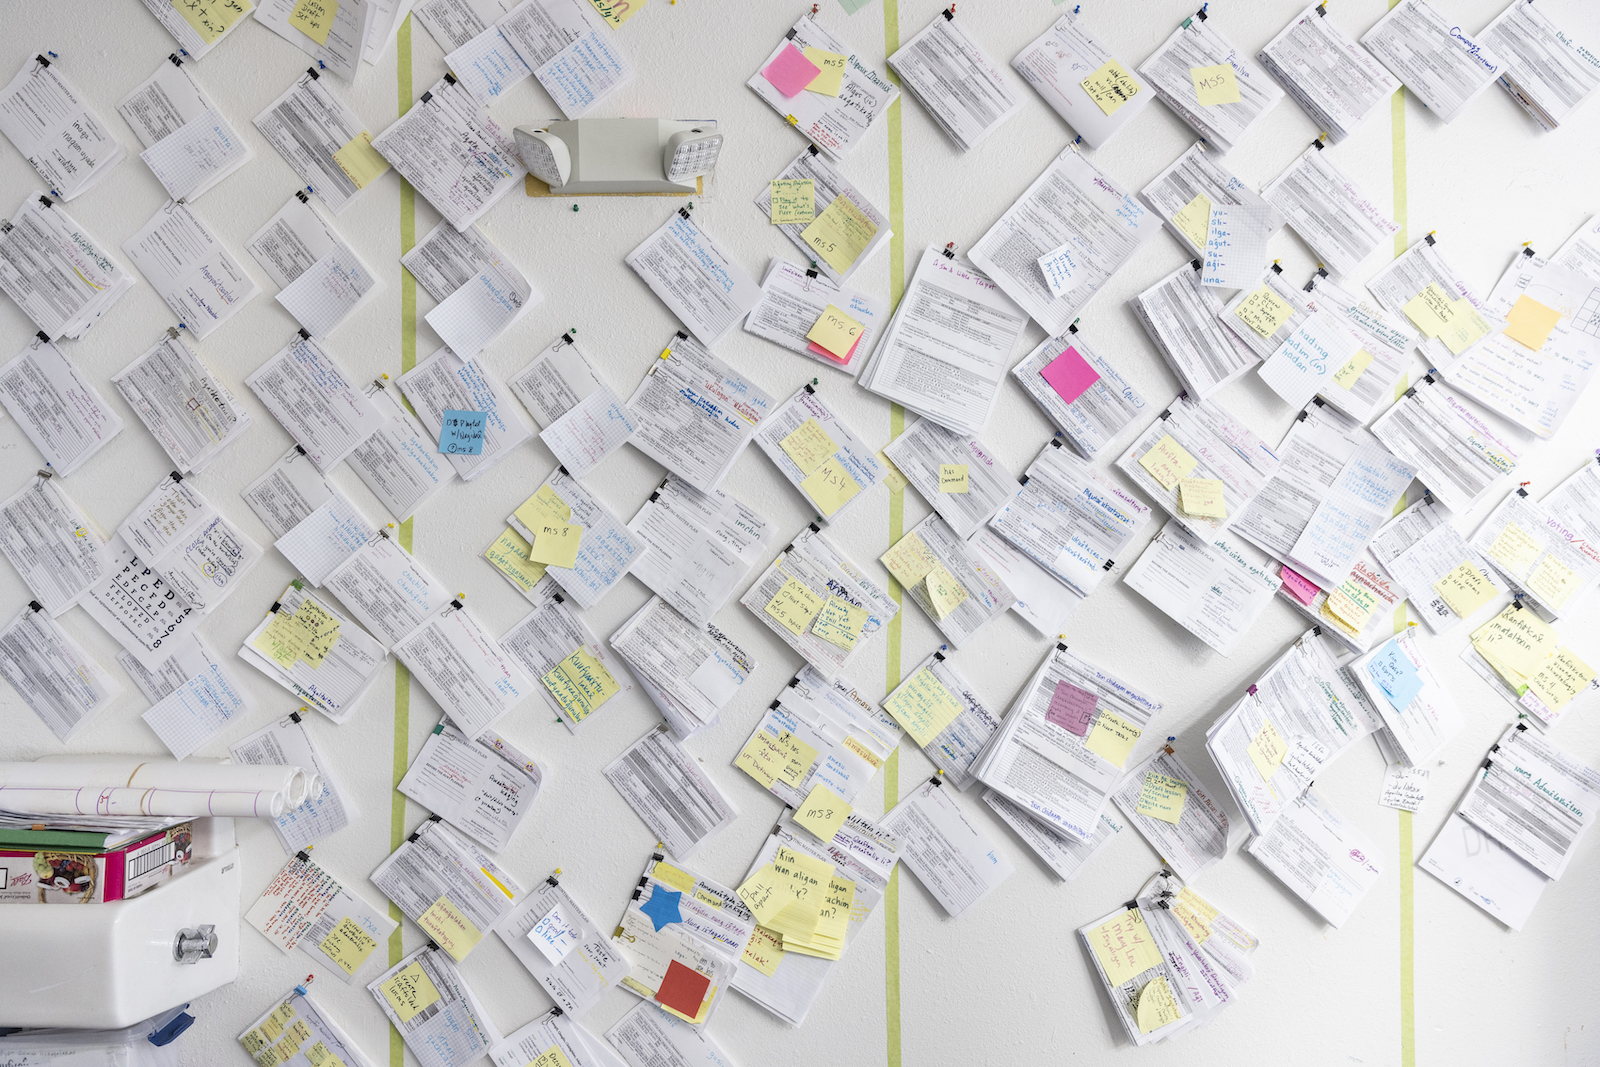 A classroom wall covered in papers and post-it notes